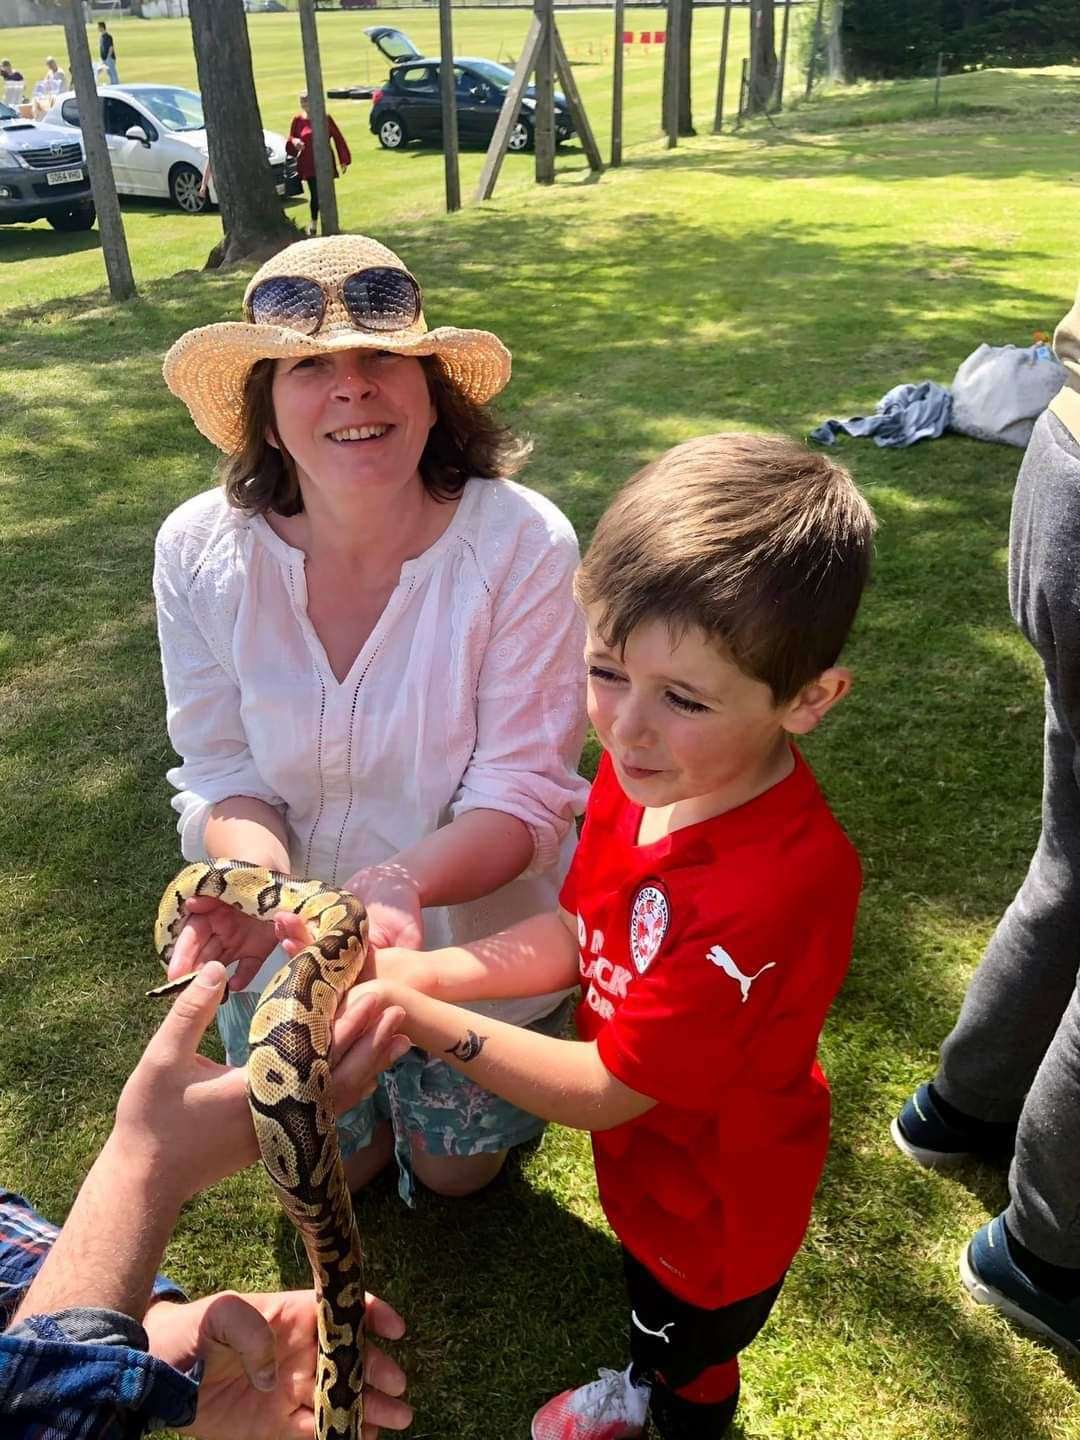 Adults and children alike seized the opportunity to touch a live snake.